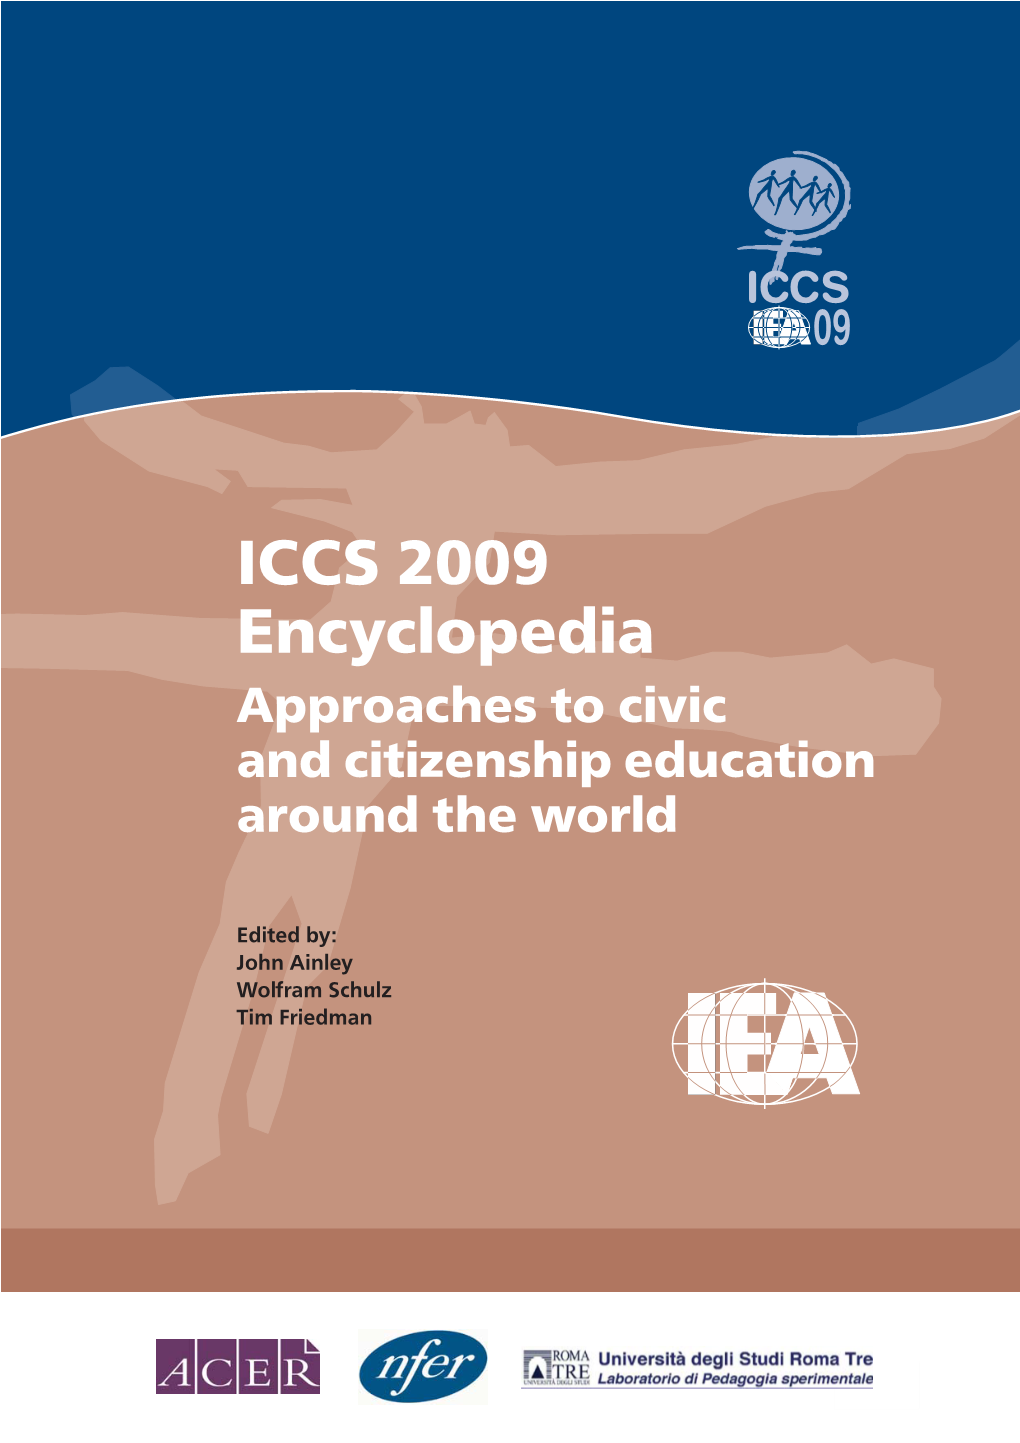 ICCS 2009 Encyclopedia Approaches to Civic and Citizenship Education Around the World